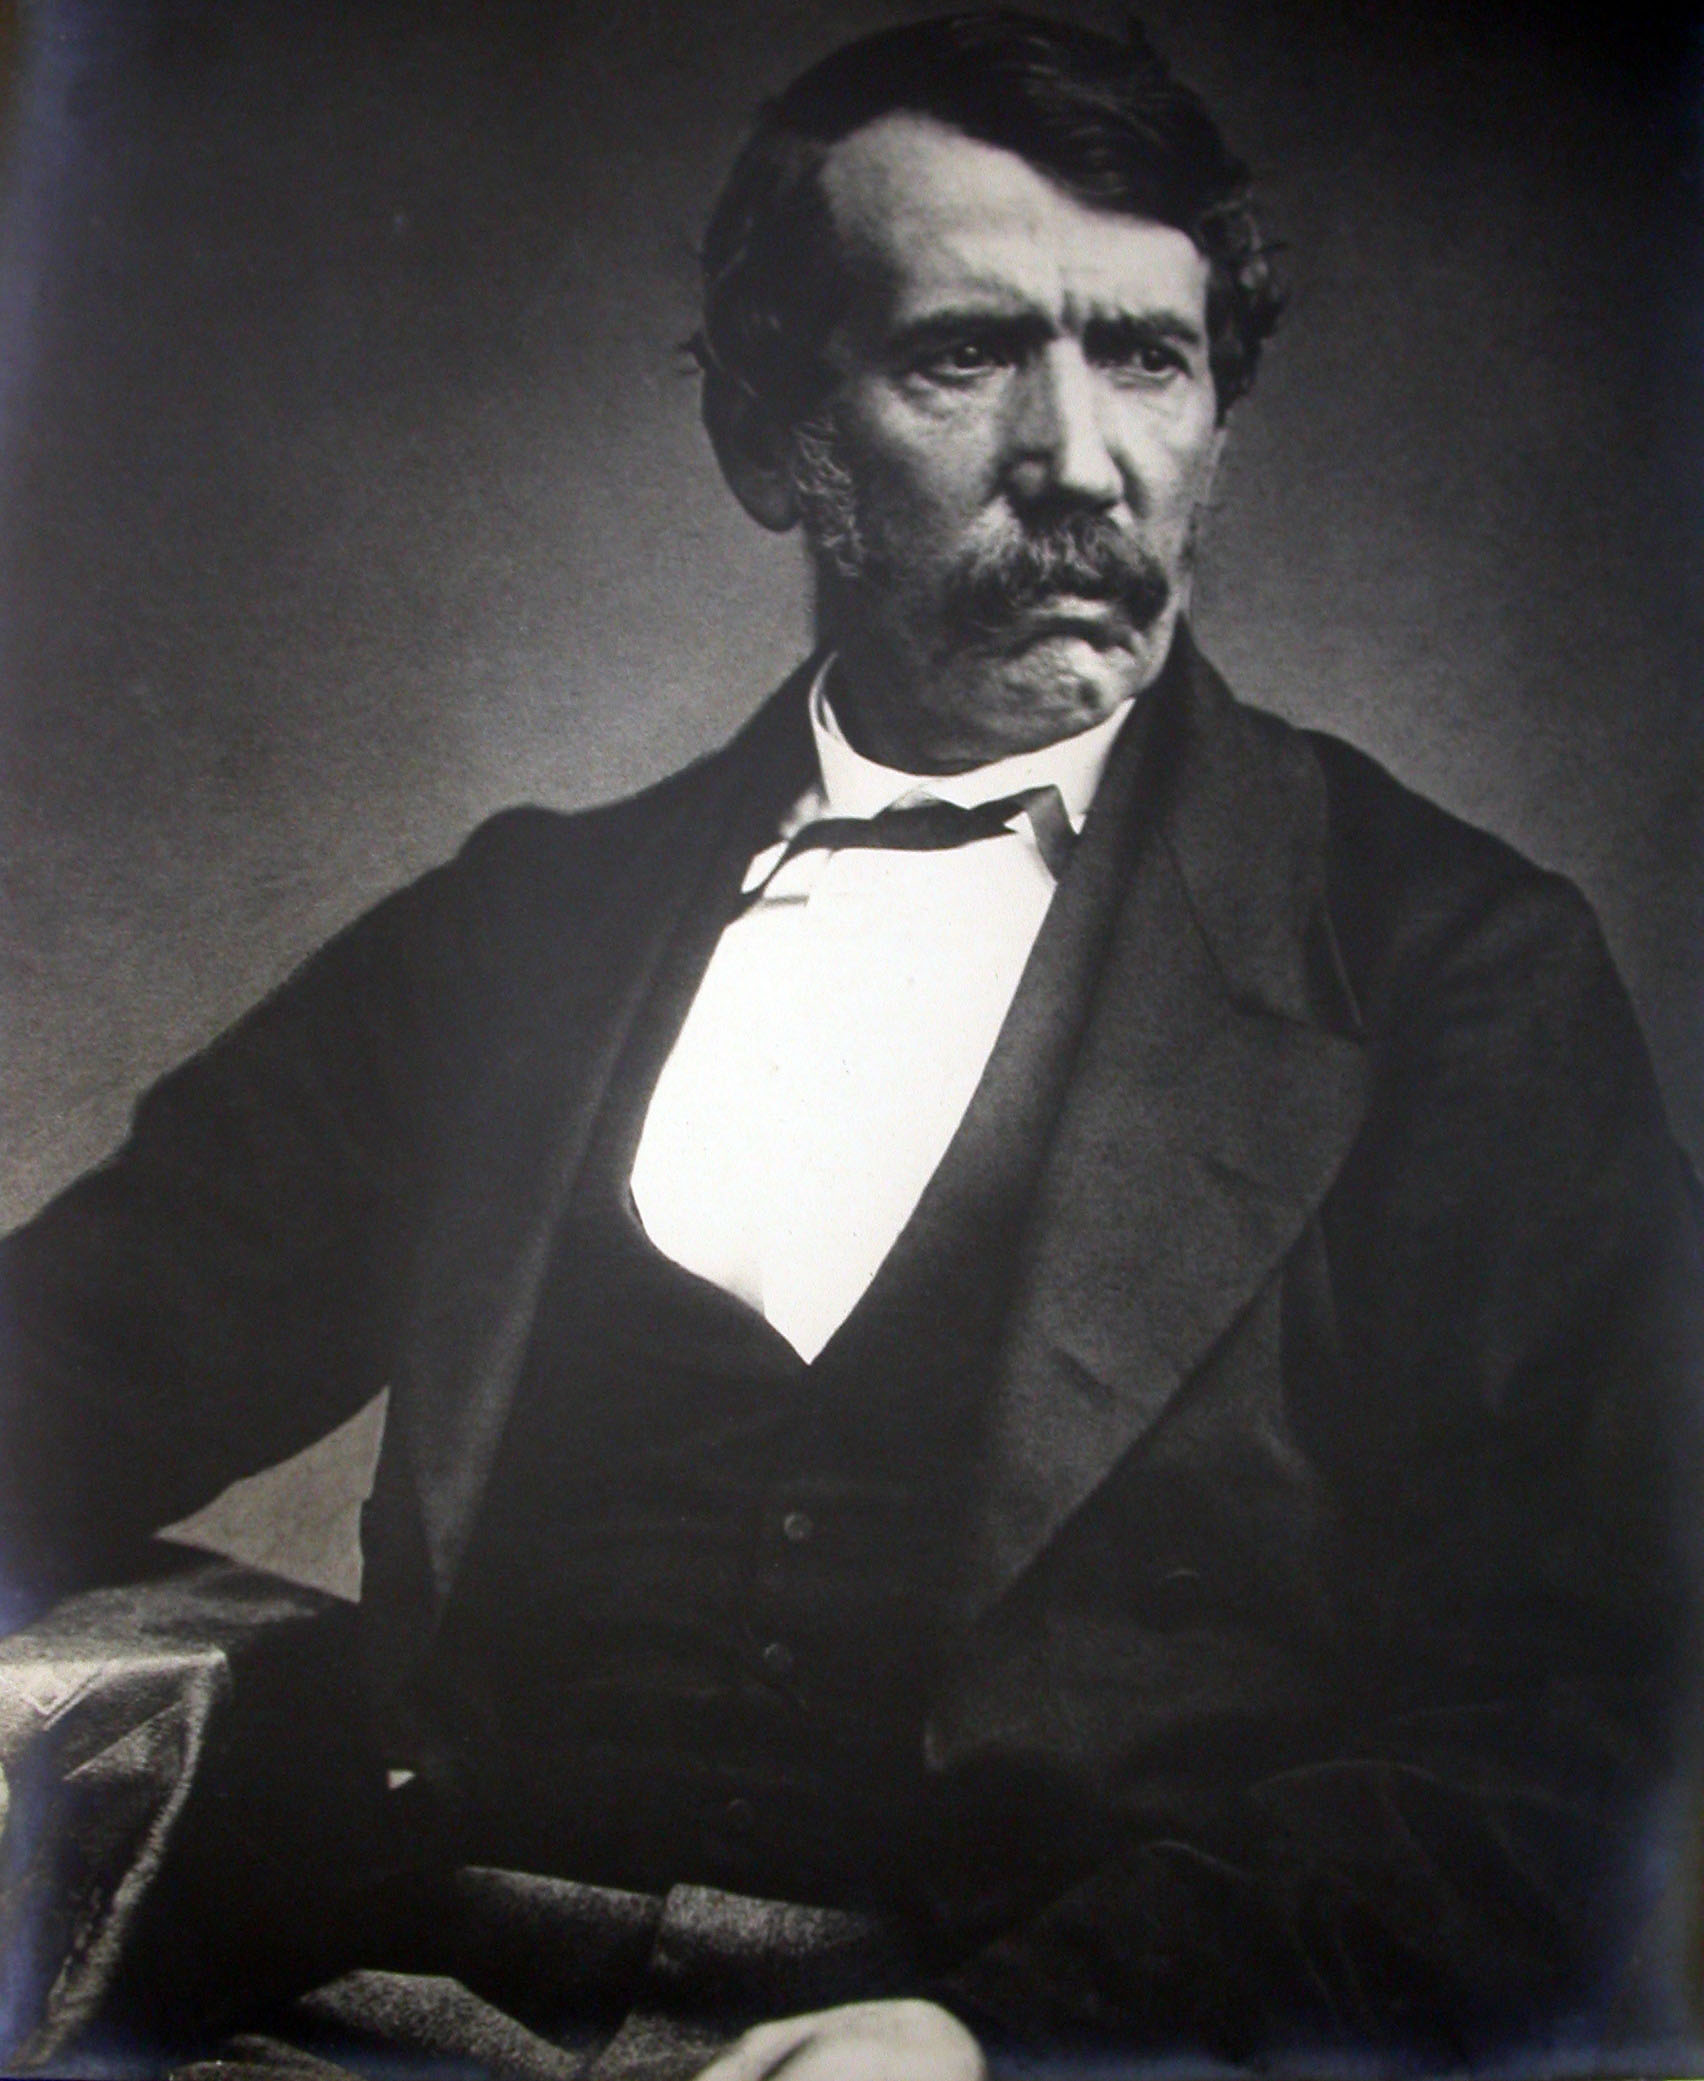 Photograph of David Livingstone, 1865. Copyright David Livingstone Centre. Object images used by permission. May not be reproduced without the express written consent of the National Trust for Scotland, on behalf of the Scottish National Memorial to David Livingstone Trust.